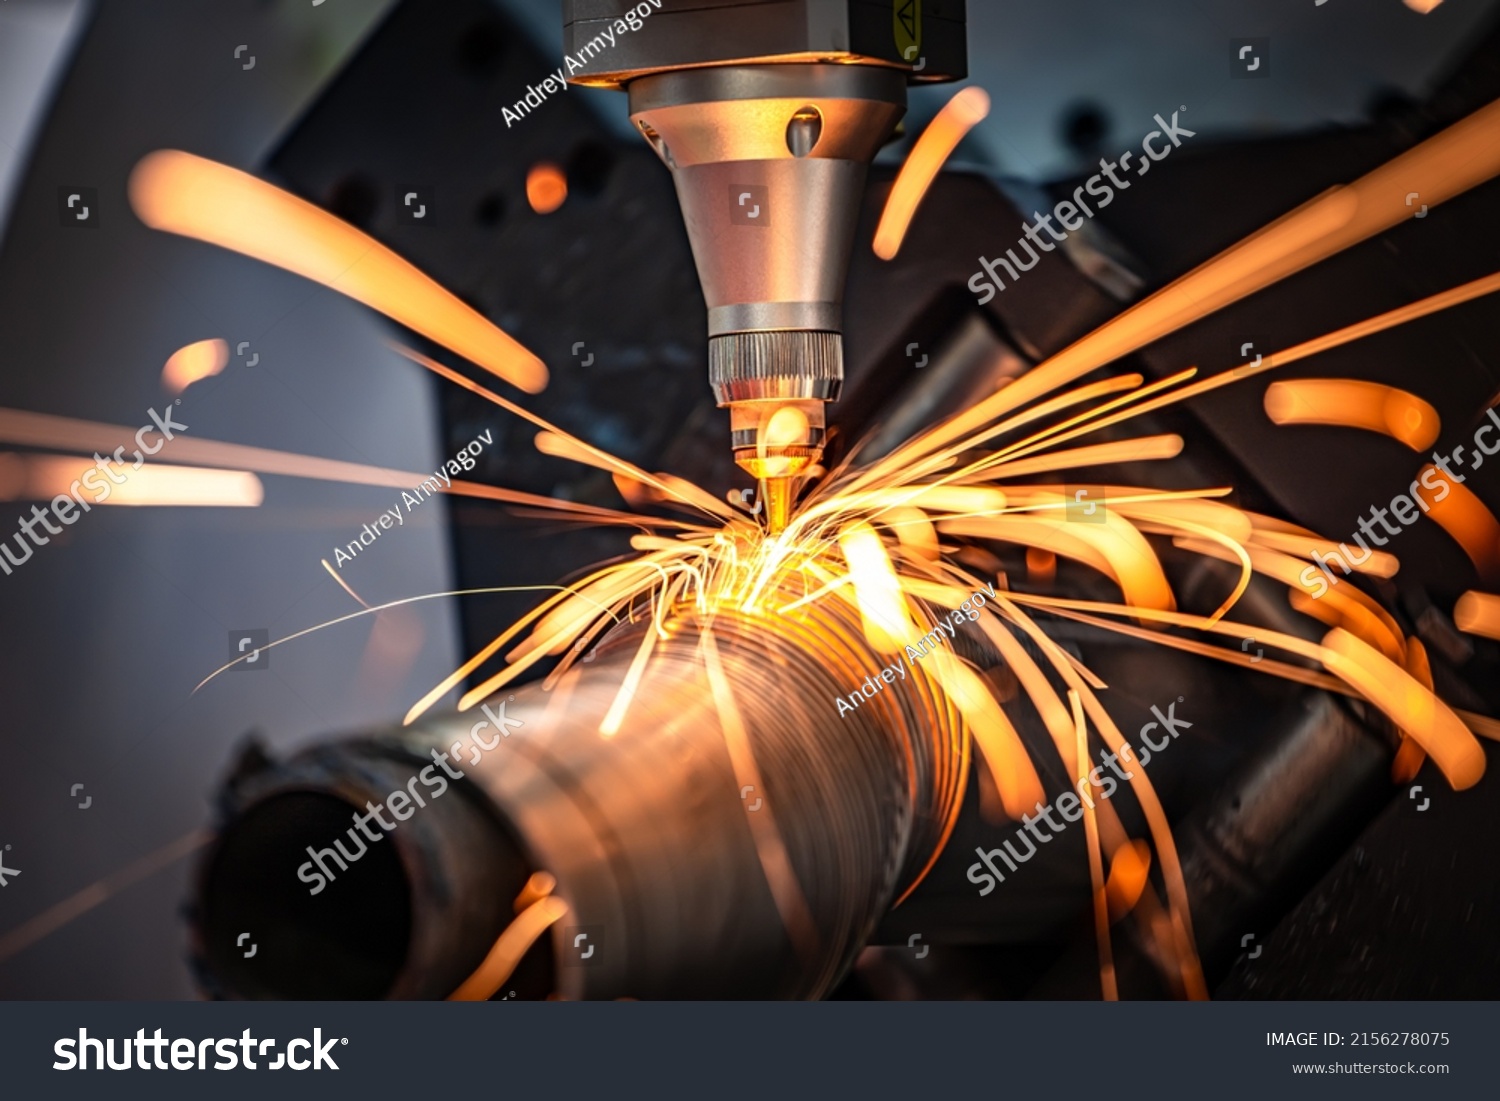 CNC Laser cutting of metal, modern industrial technology Making Industrial Details. The laser optics and CNC (computer numerical control) are used to direct the material or the laser beam generated. #2156278075